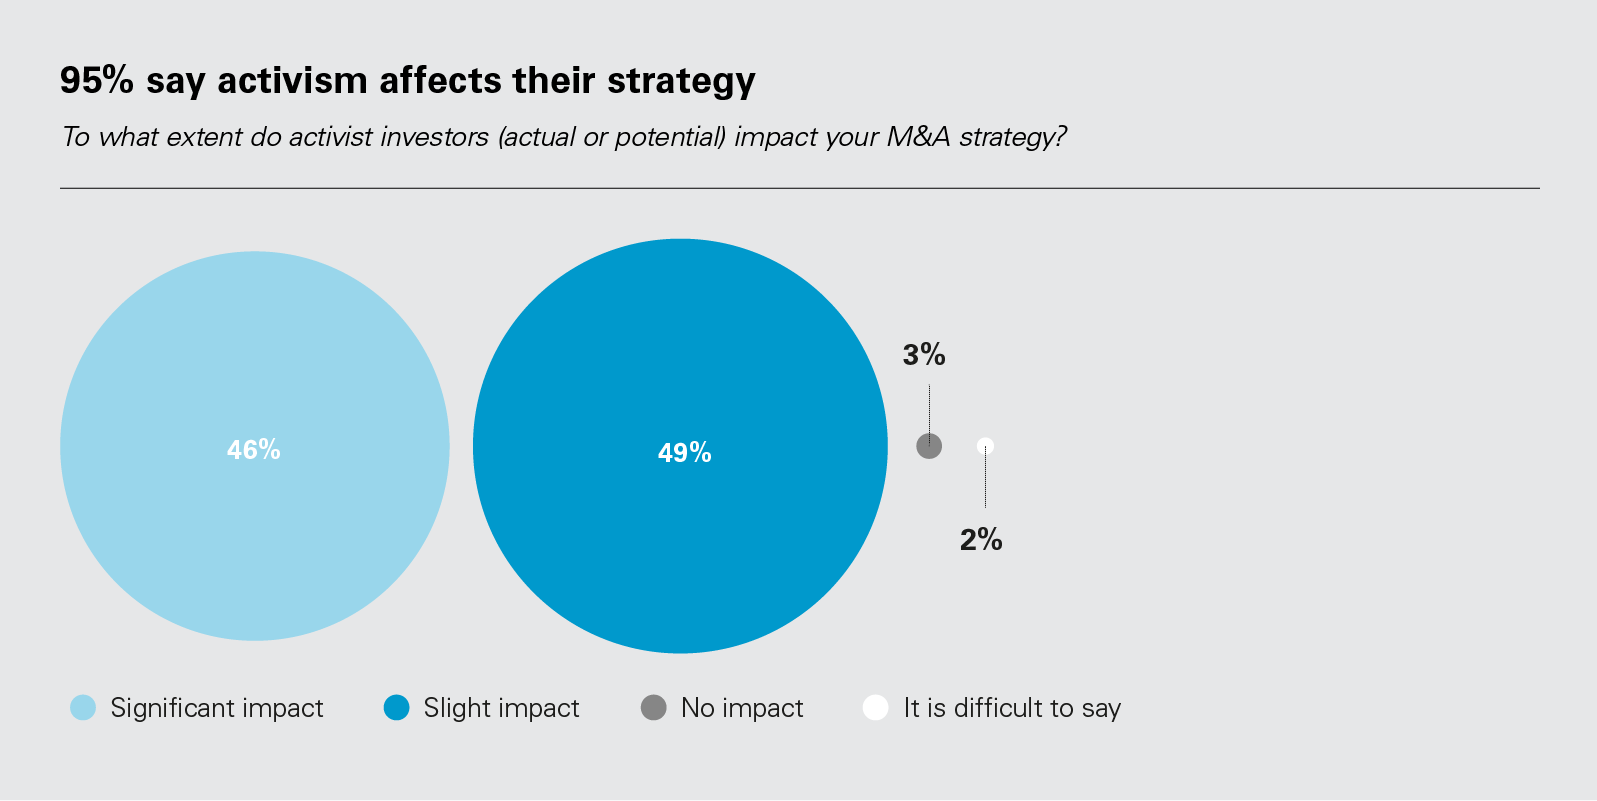 95% say activism affects their strategy